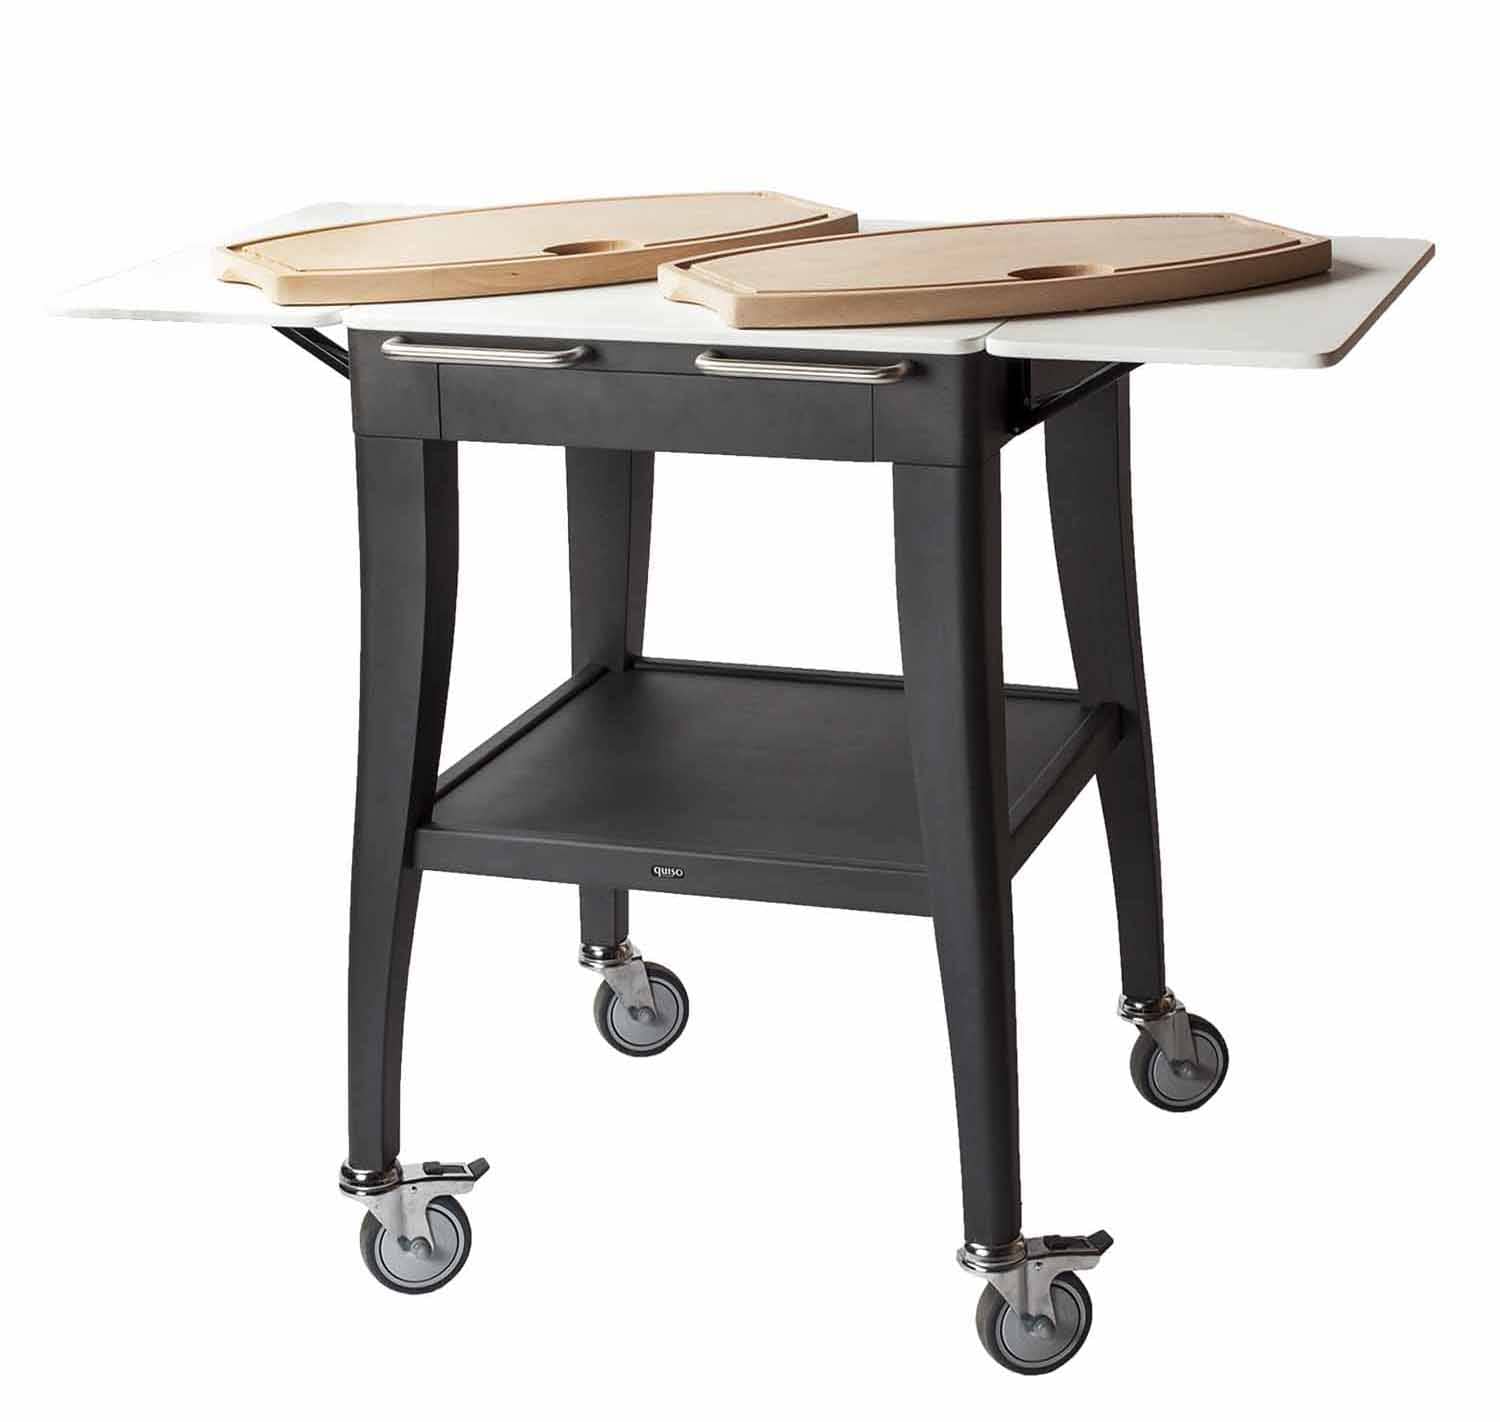 QUISO Km31 multifunctional trolley in black beech and white Krion top with two cutting boards